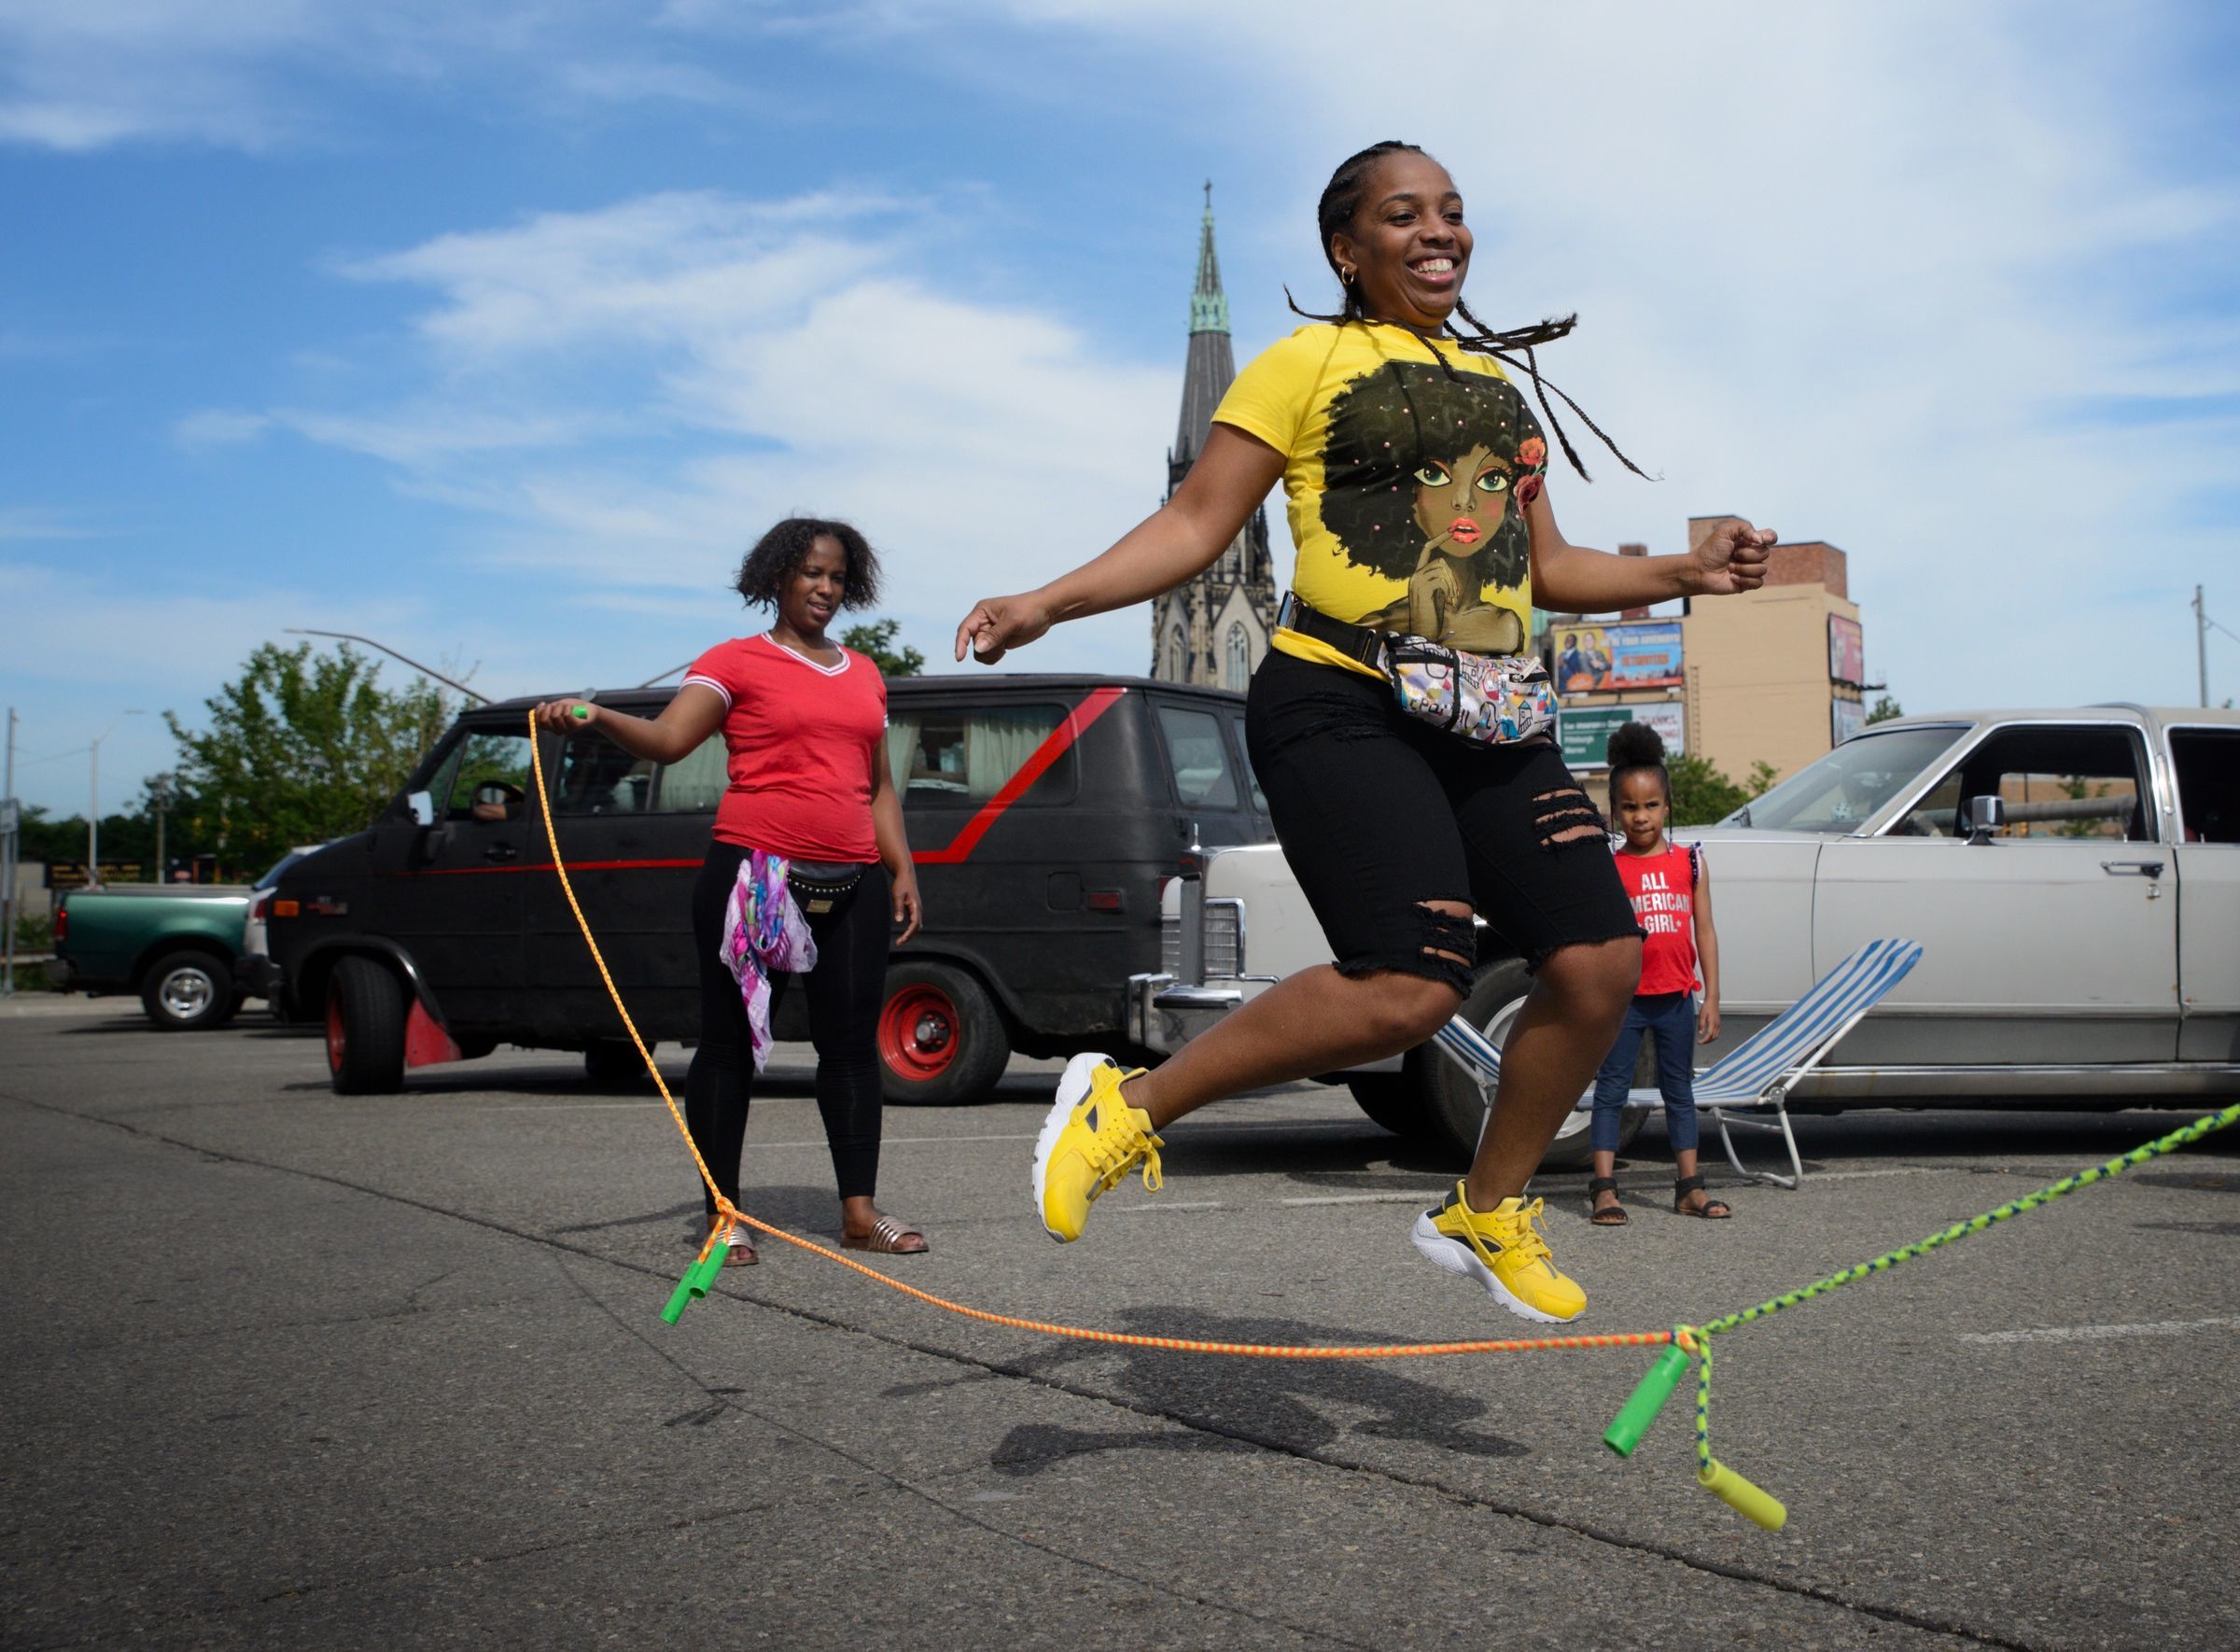 Mina Powell of Southfield skips rope at Eastern Market before the 2018 Ford Fireworks in Detroit on Monday, June 25, 2018.